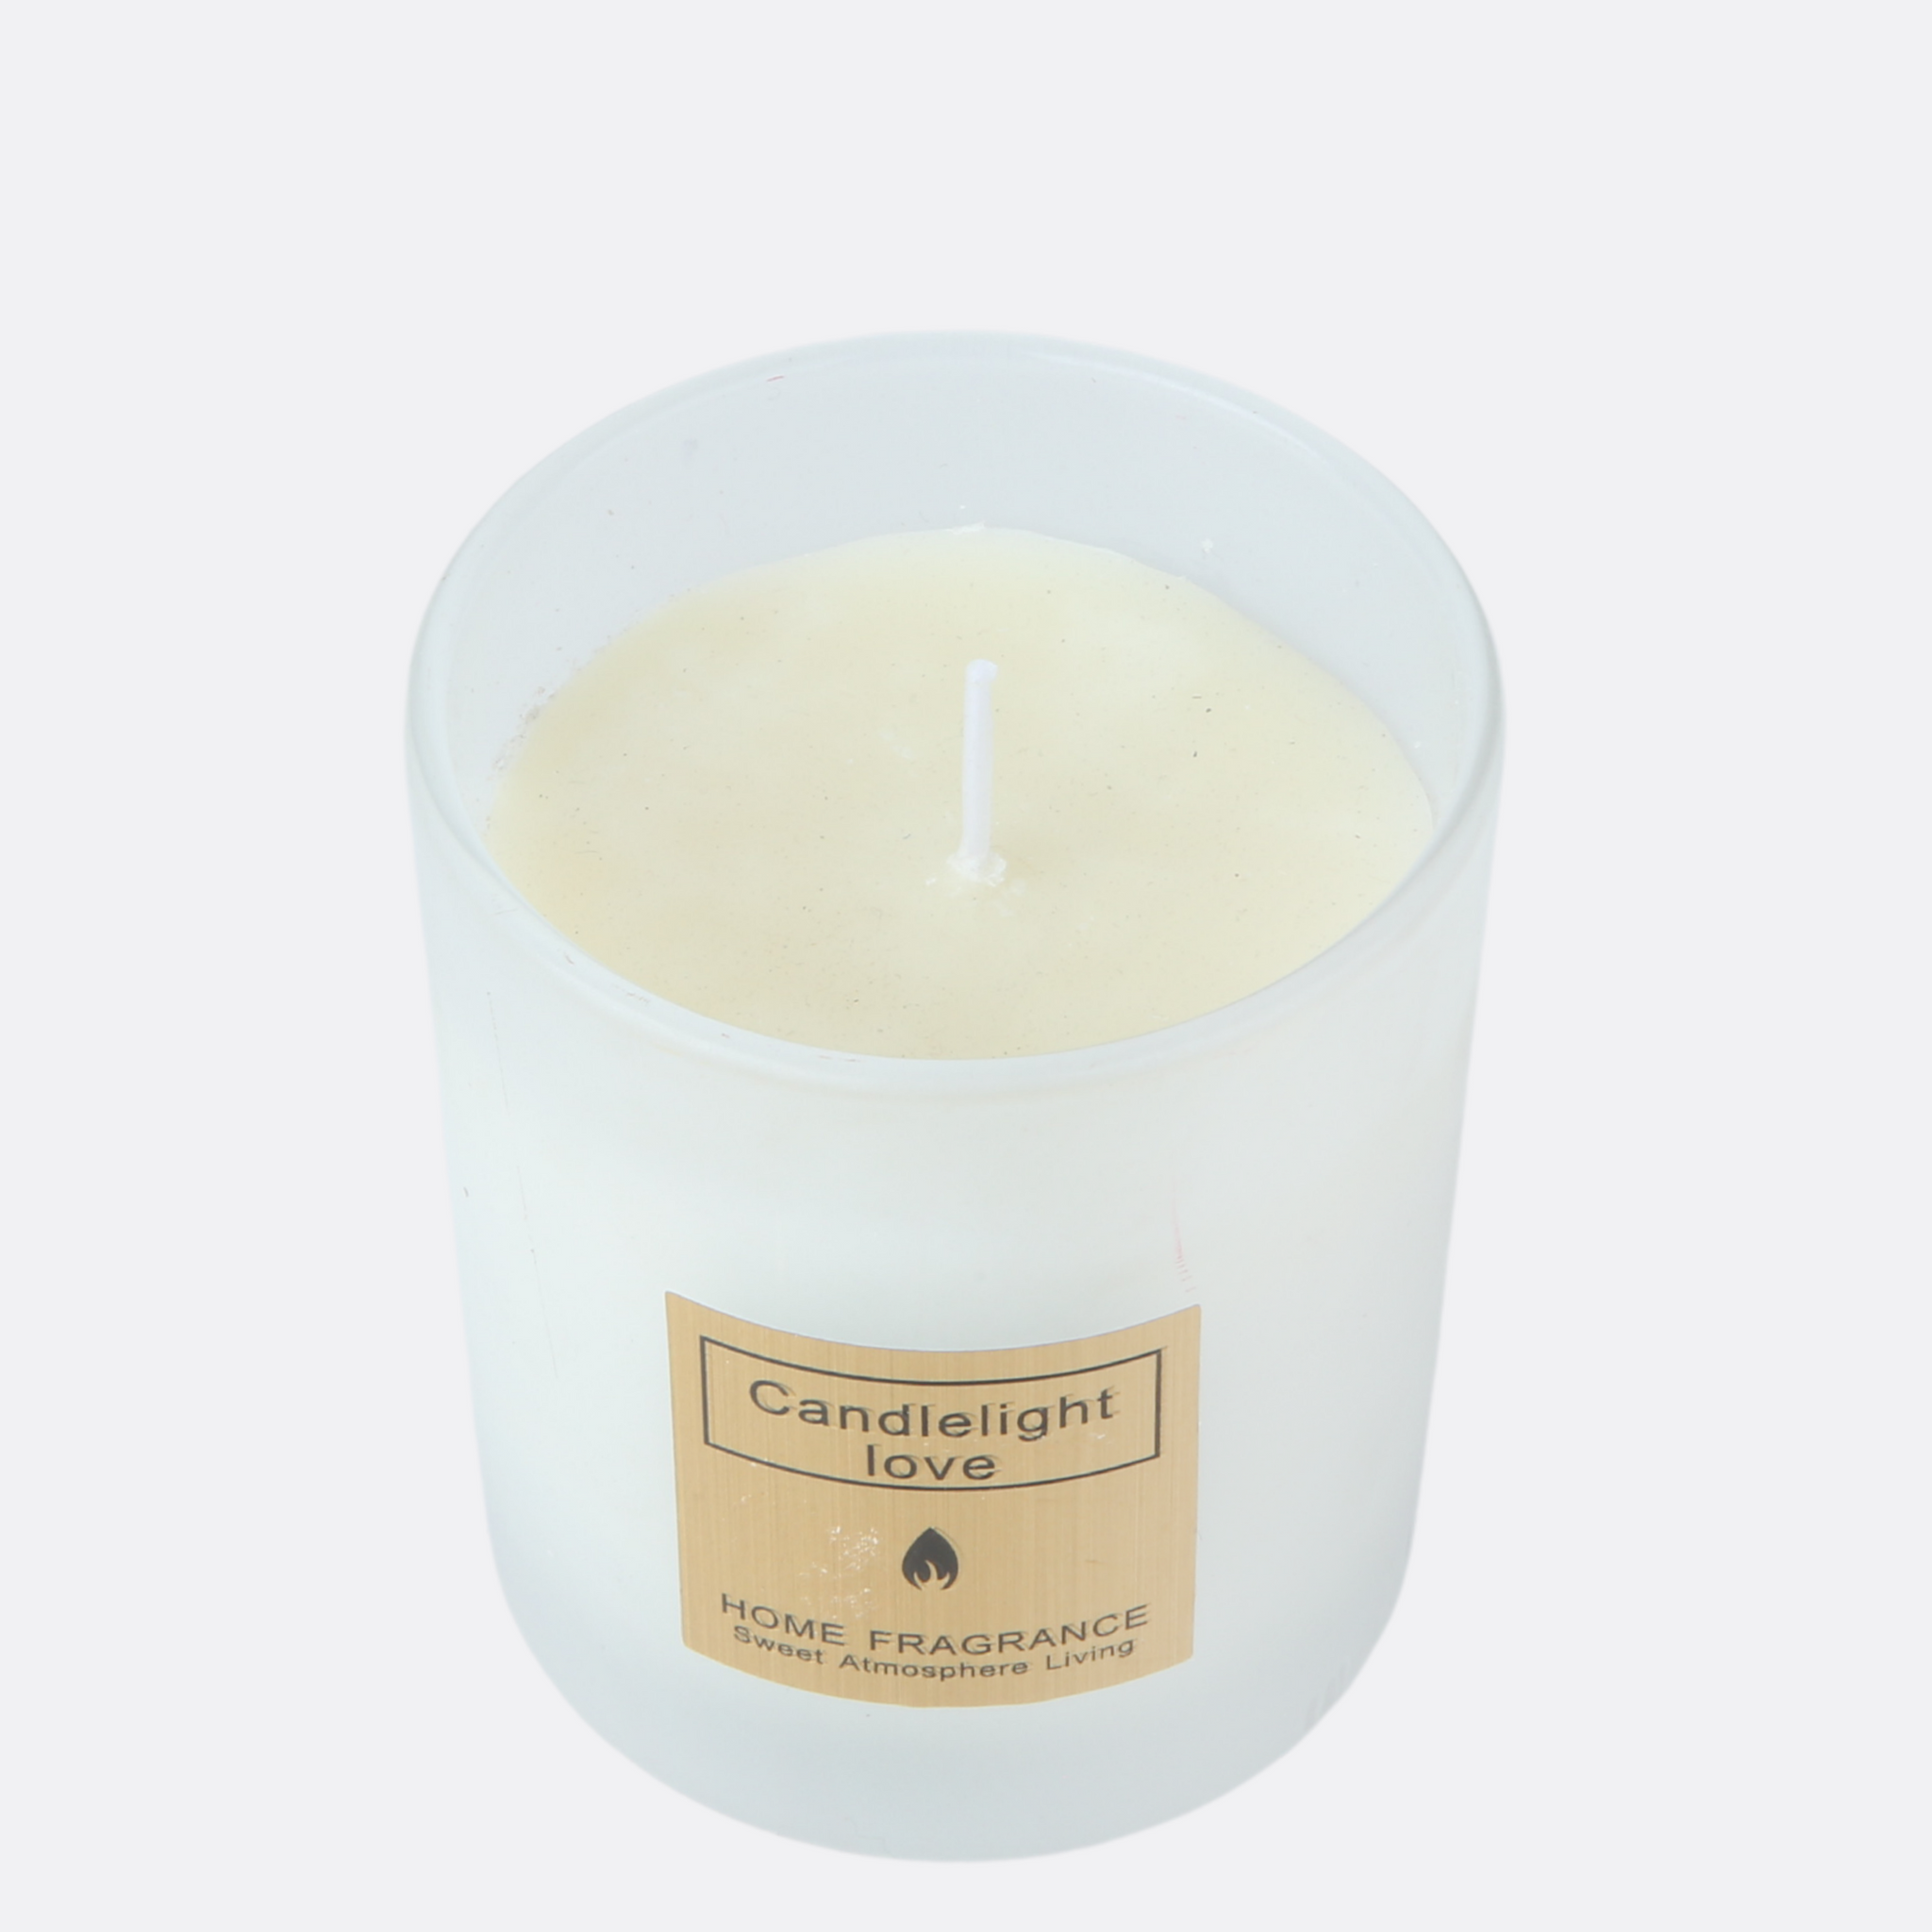 Atmosphere Fragrant Candle